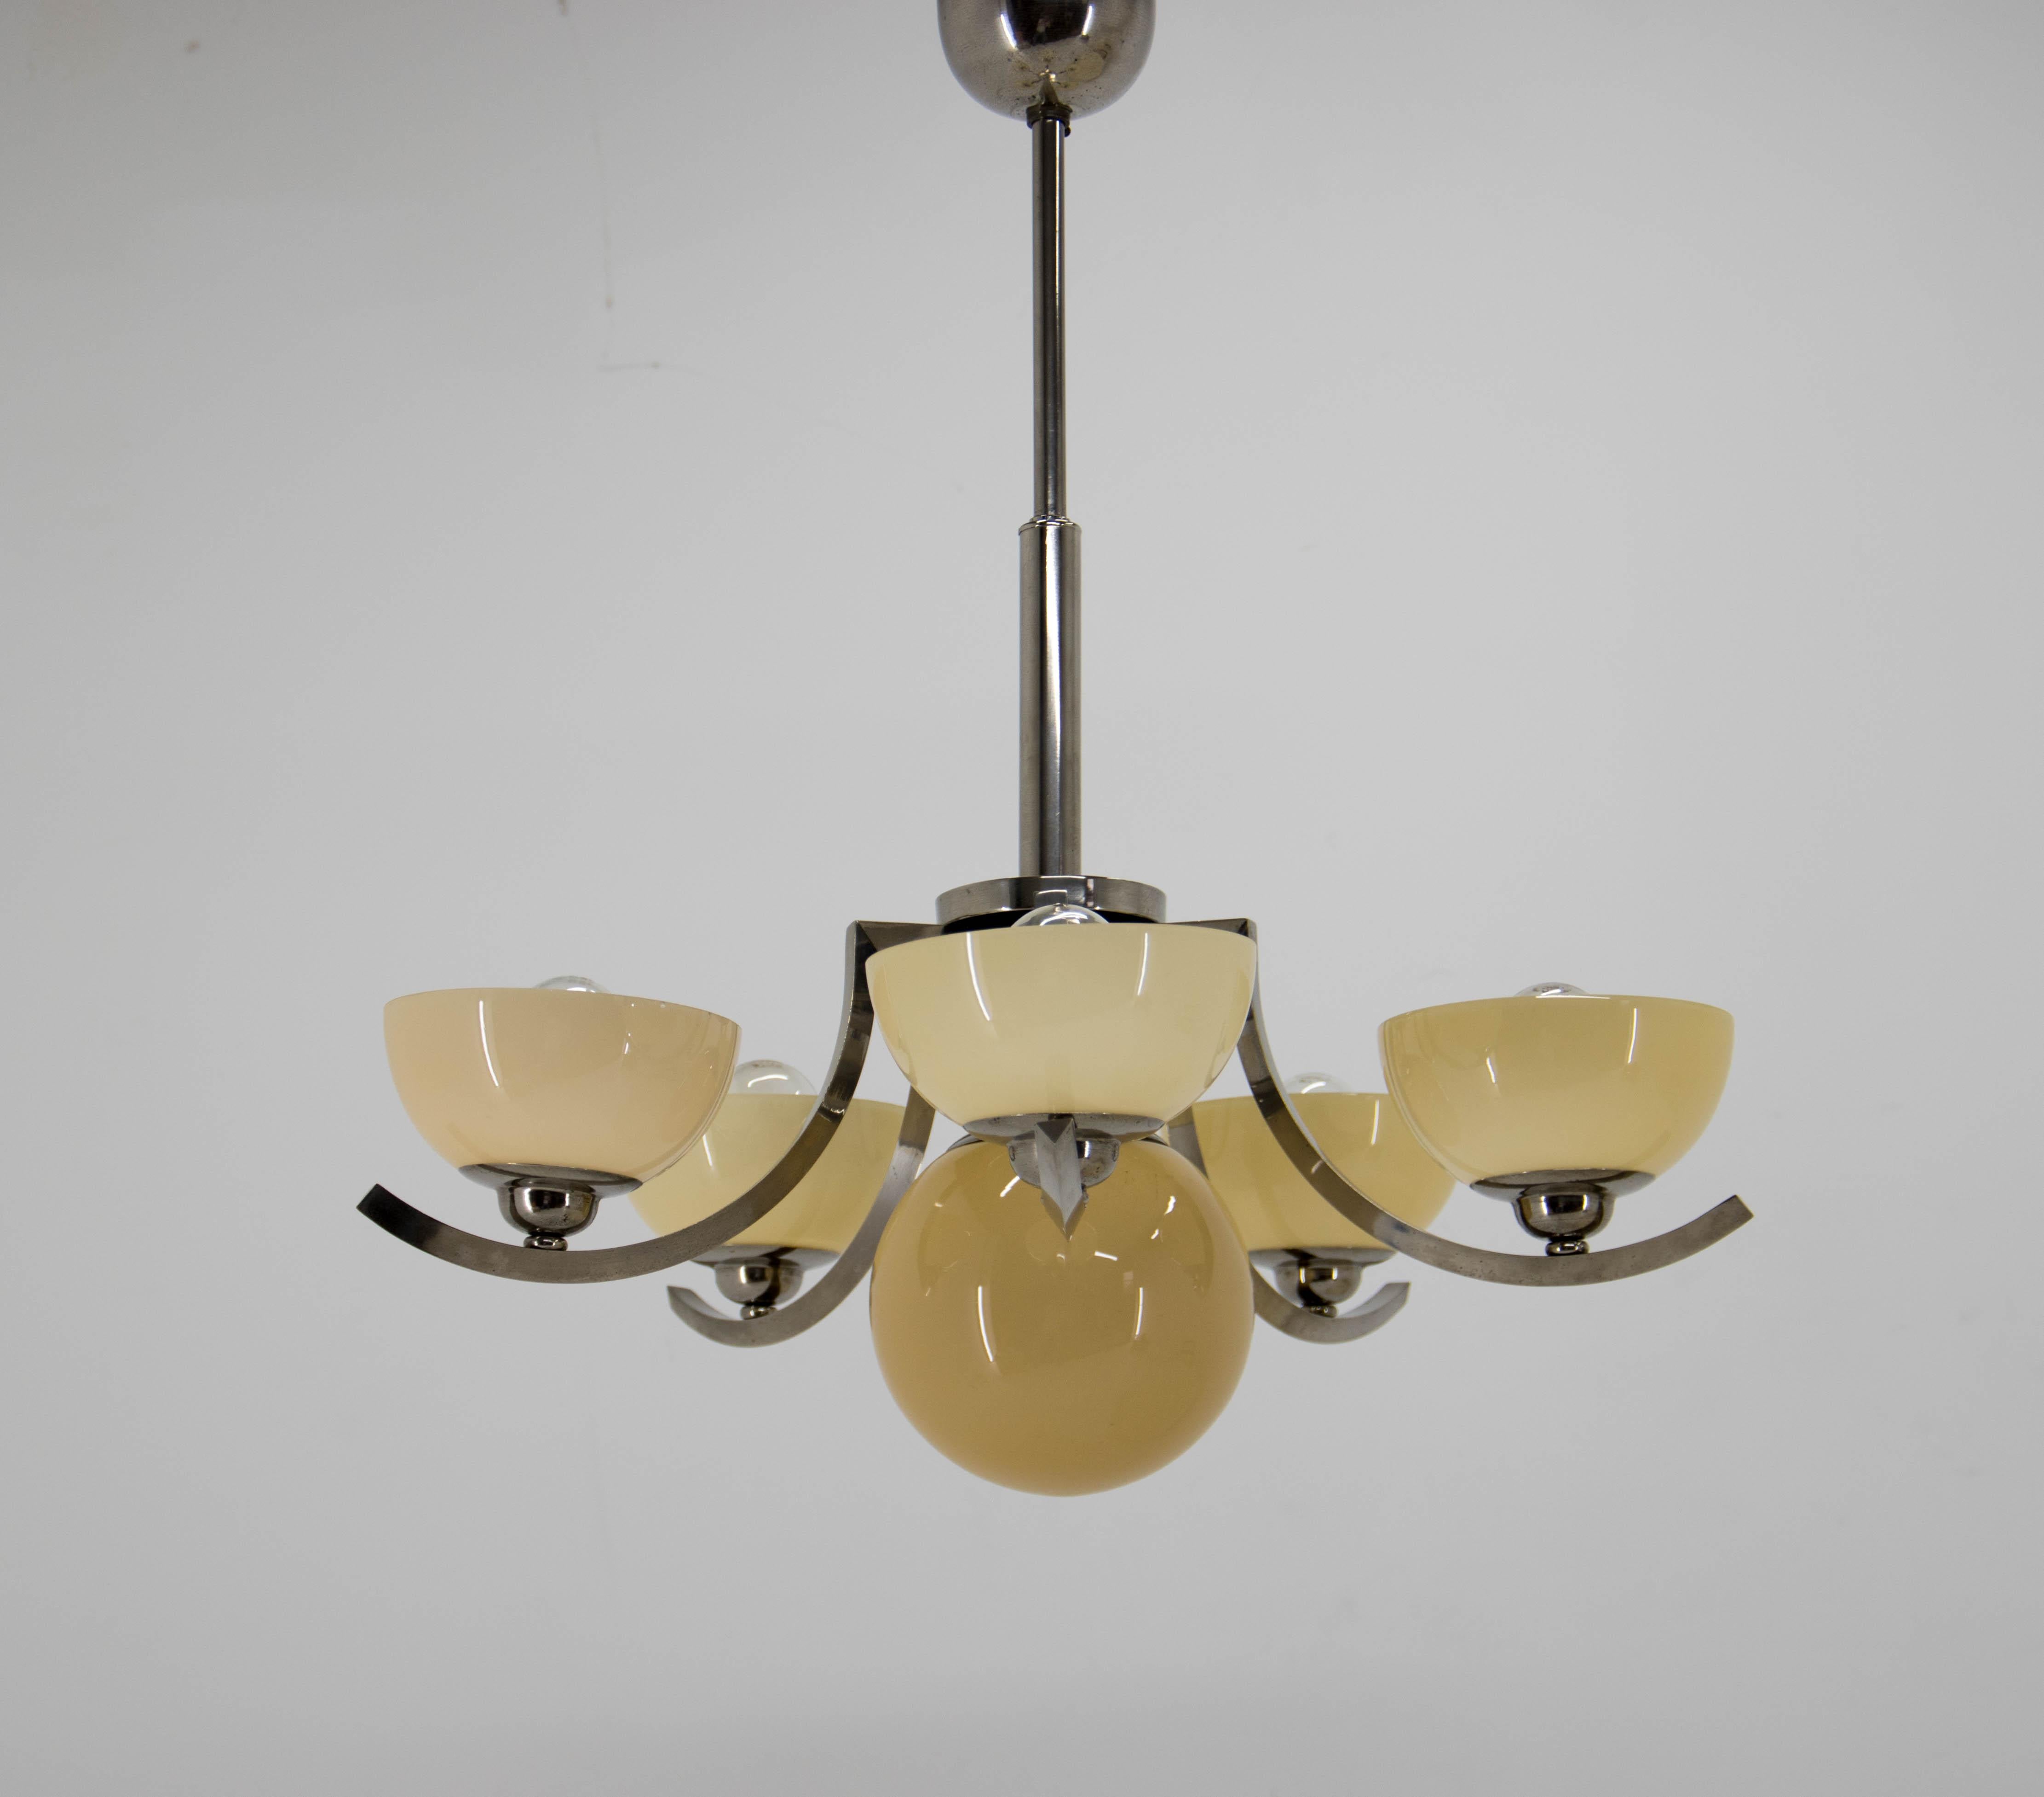 Beautiful Art Deco chandelier.
Restored: nickel polished, rewired
Original glass shades in perfect condition. Slight color differences in shades.
Two separate circuits: 5+1x40W, E25-E27 bulbs
US wiring compatible.